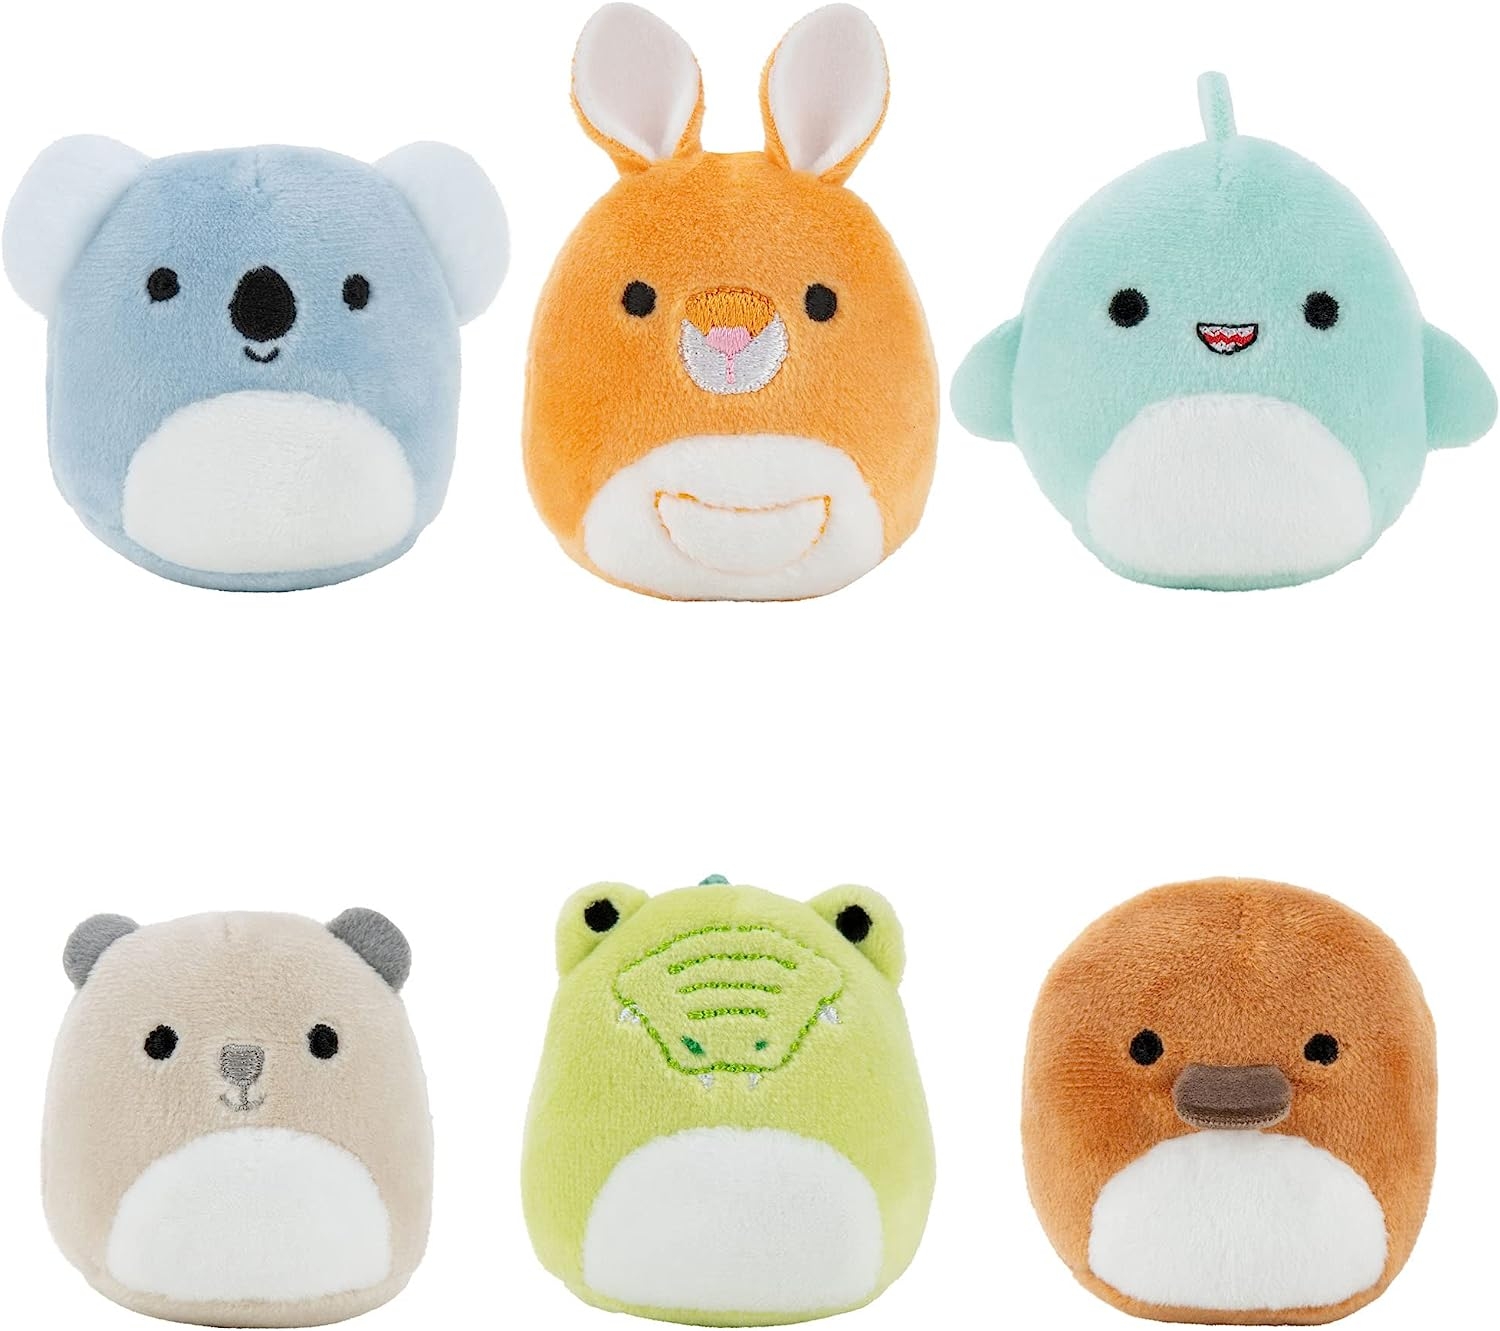 Squishville by Original Squishmallows Down Under Squad Plush – Six 2-Inch Wesley, Kayla, Keely, Ham, Santino, and Sharon Plush –